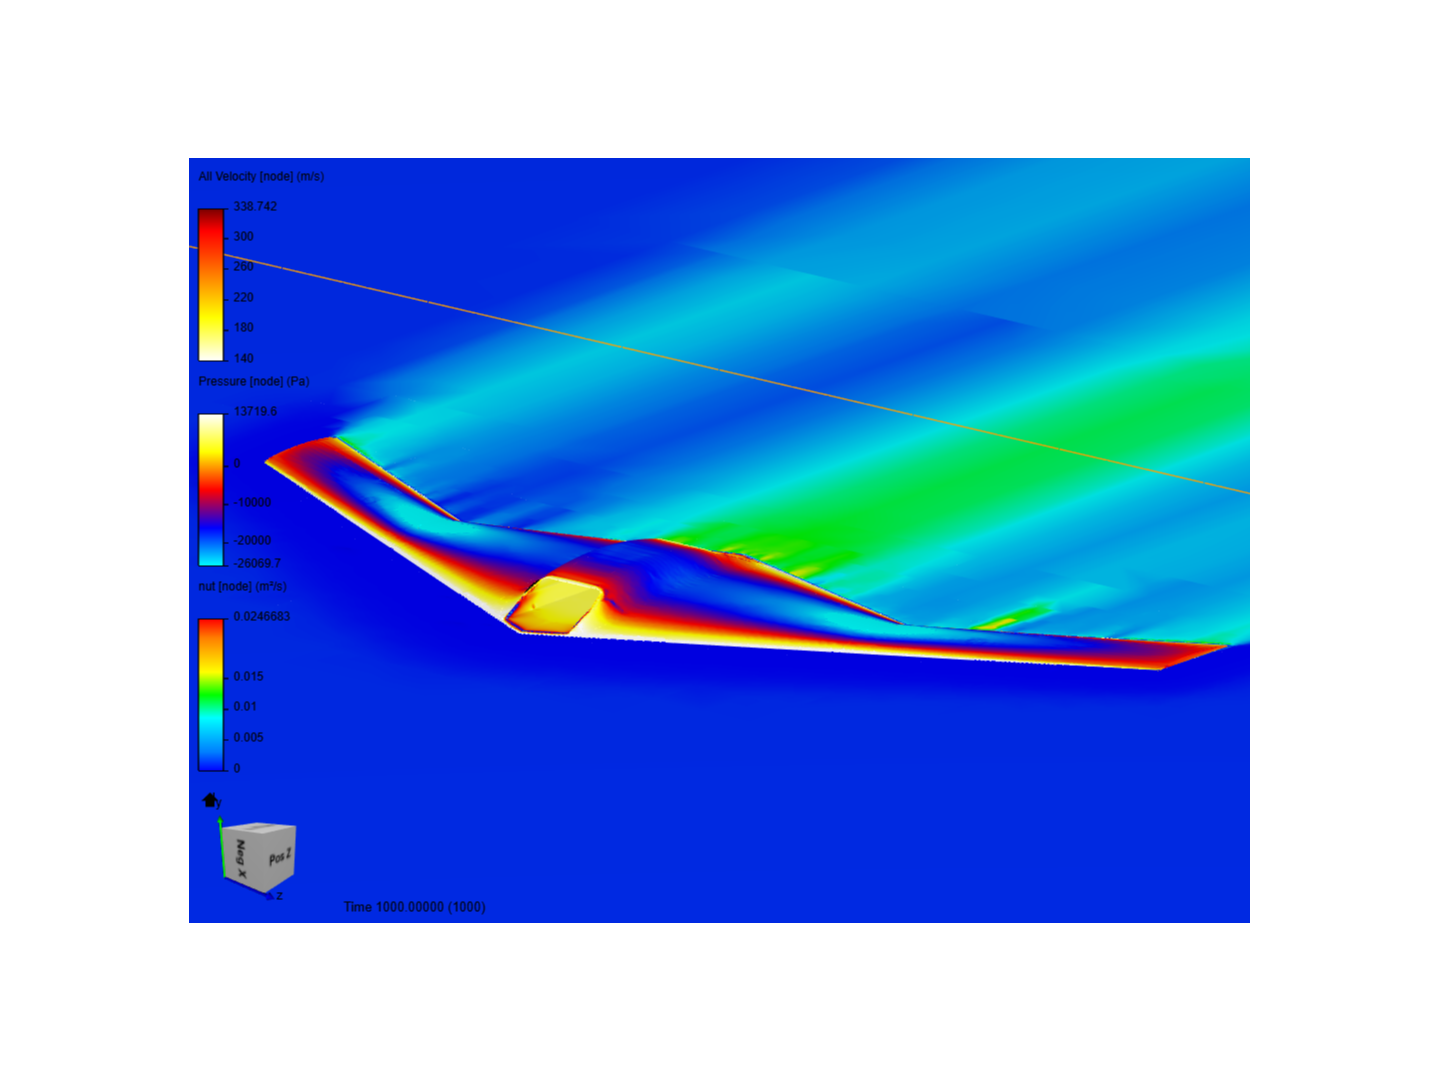 Drone LM RQ-170 Sentinel CFD - Drag Coefficient - Copy image